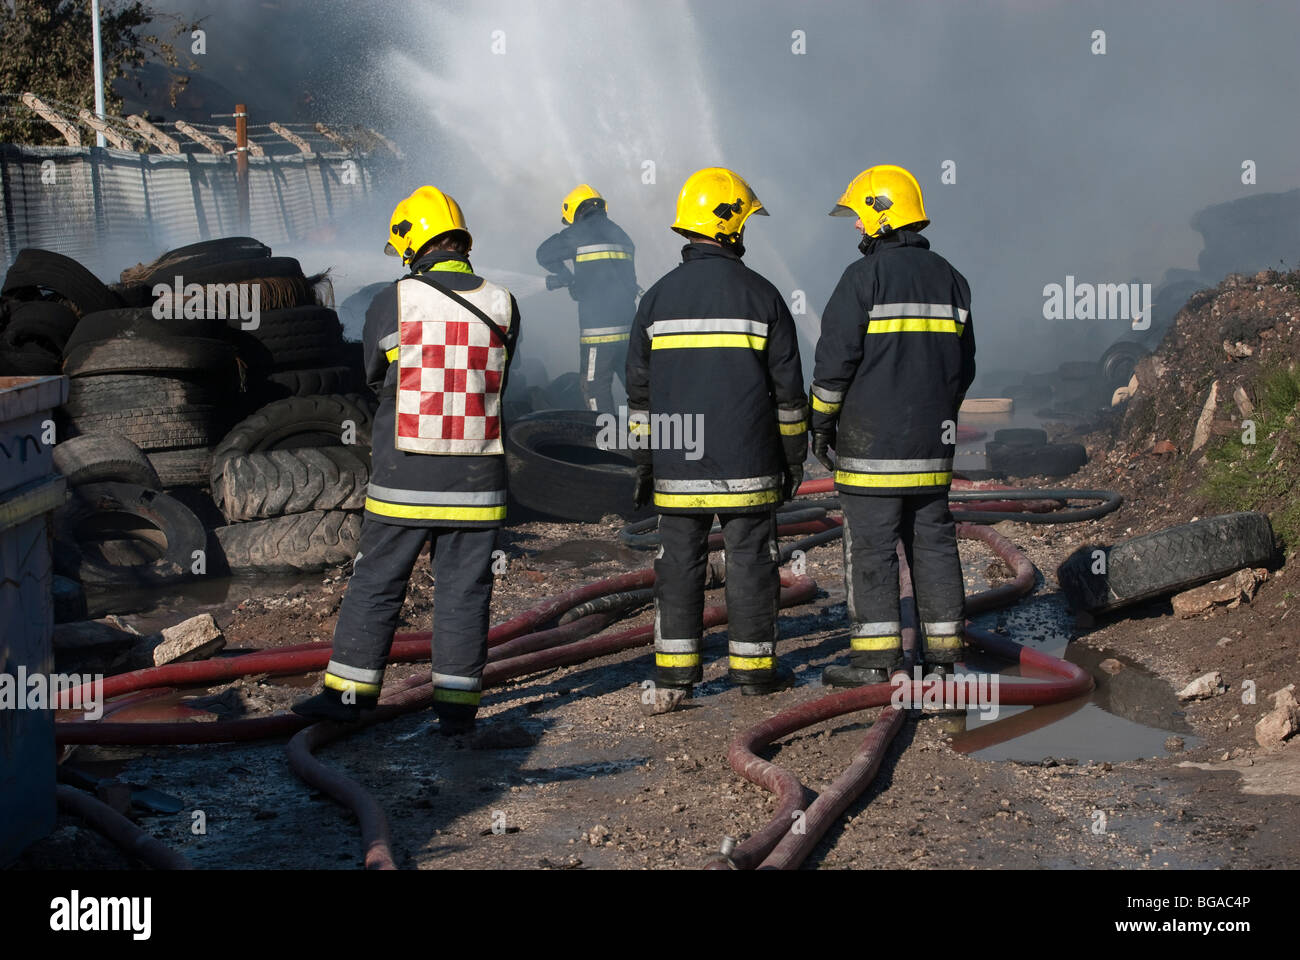 Firemen damping down at pile of tyres on fire Stock Photo